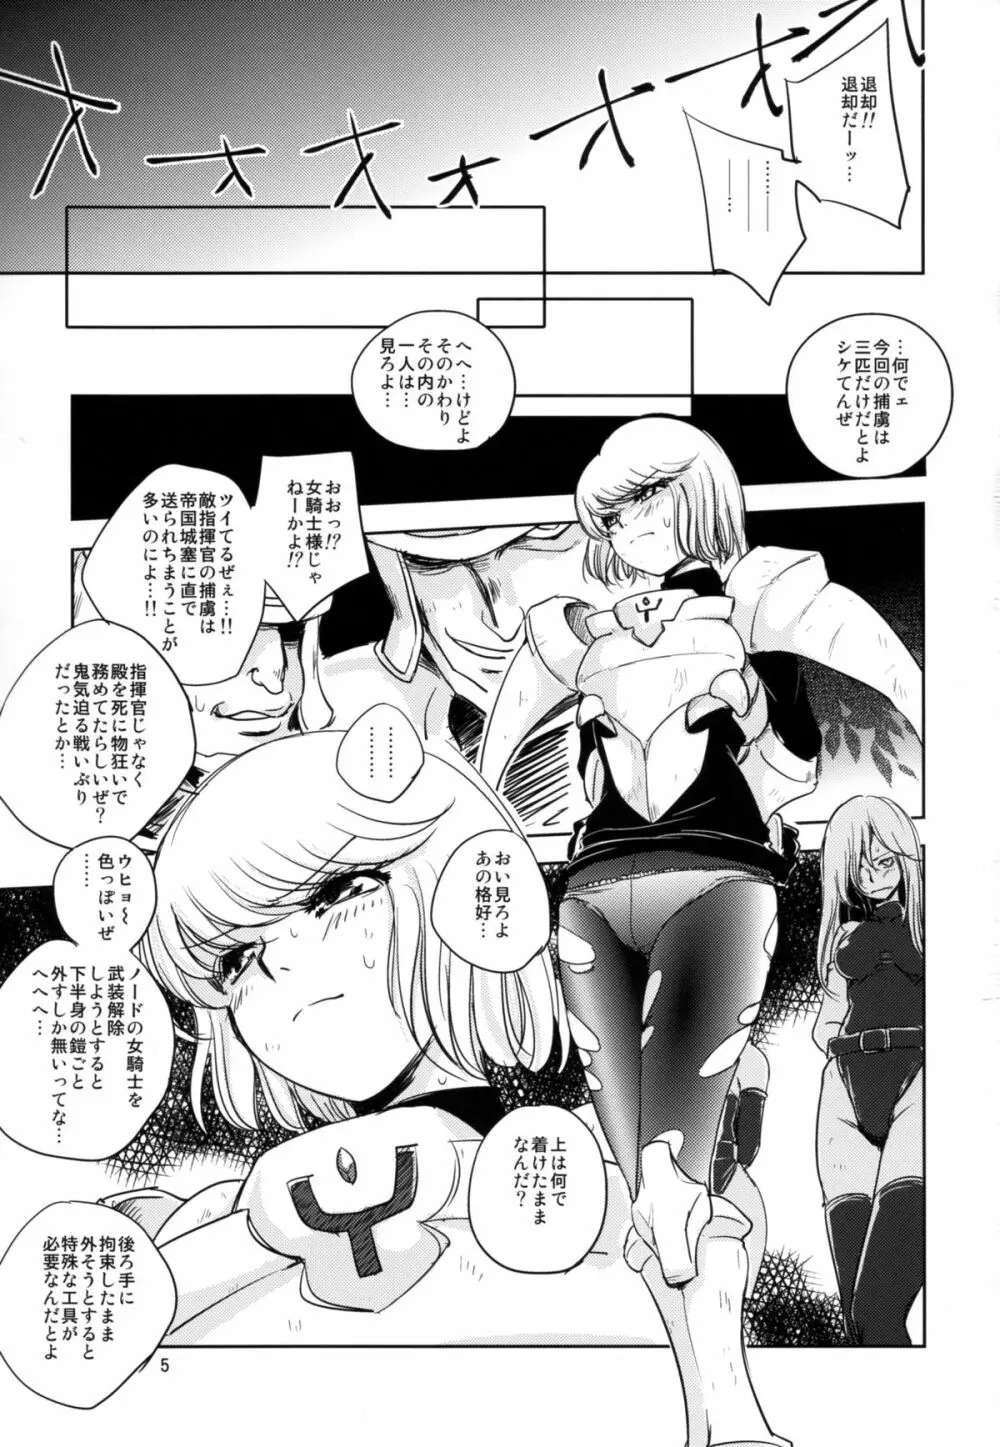 GRASSEN'S WAR ANOTHER STORY Ex #04 ノード侵攻 IV Page.5